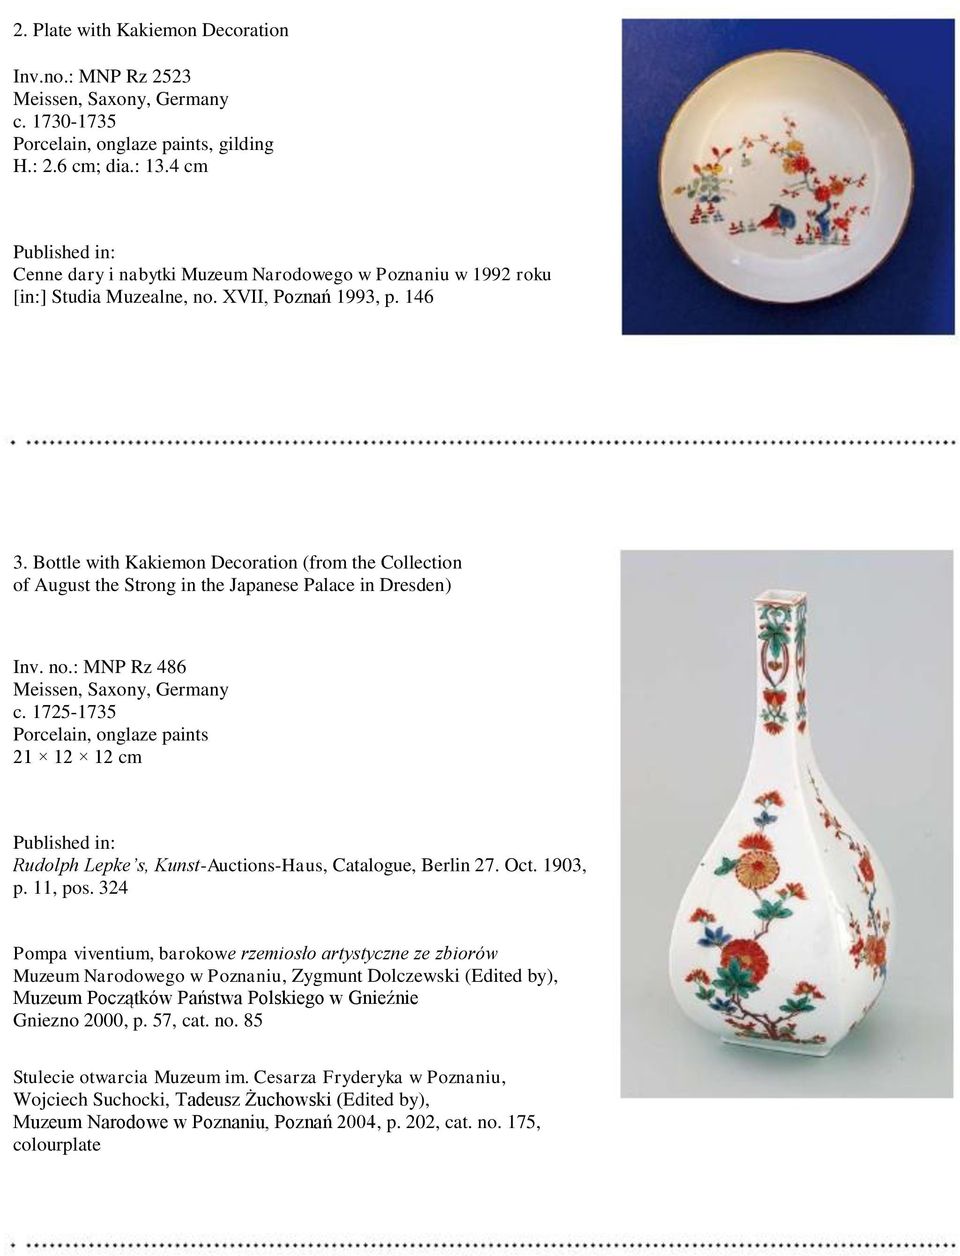 Bottle with Kakiemon Decoration (from the Collection of August the Strong in the Japanese Palace in Dresden) Inv. no.: MNP Rz 486 c.